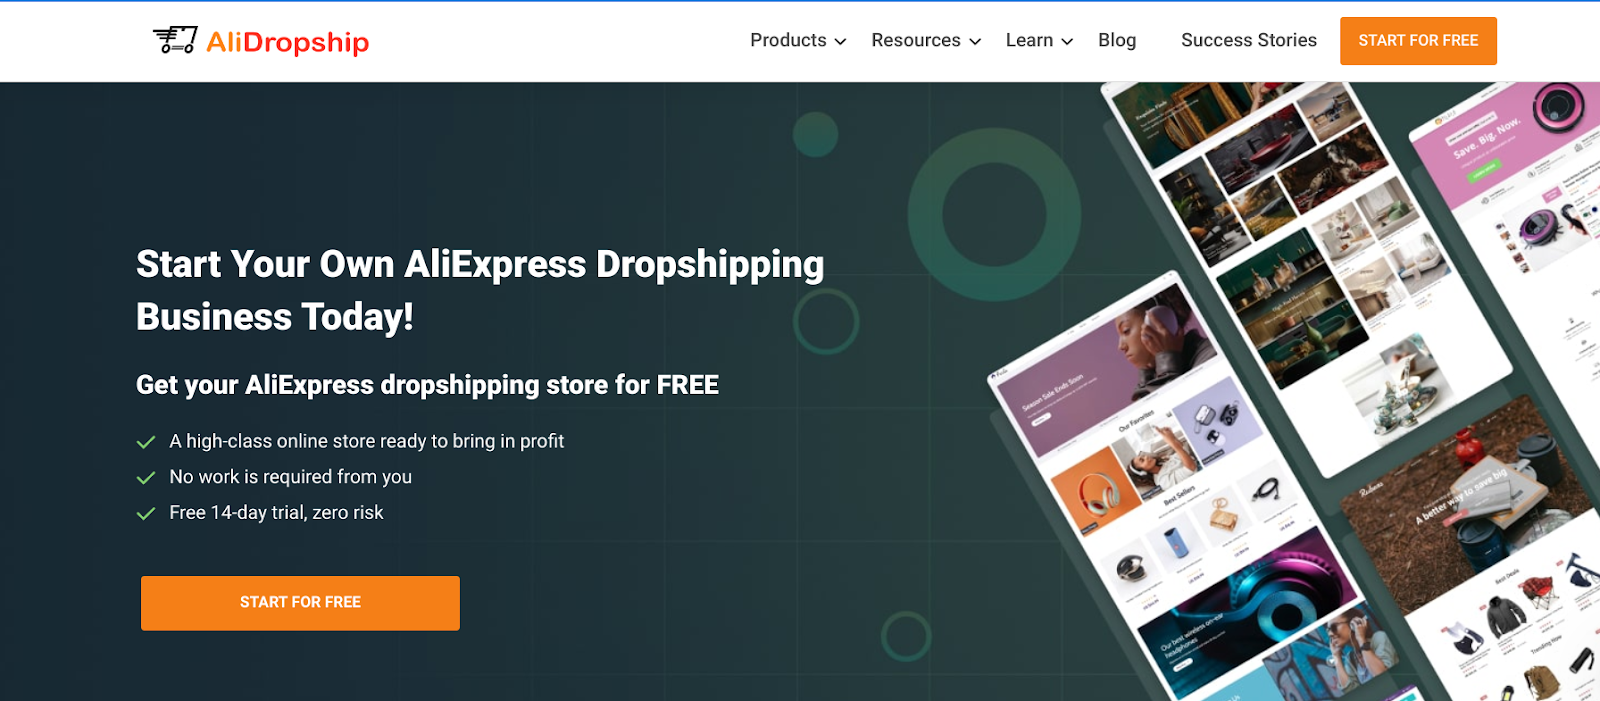 start your dropshipping business with AliDropship